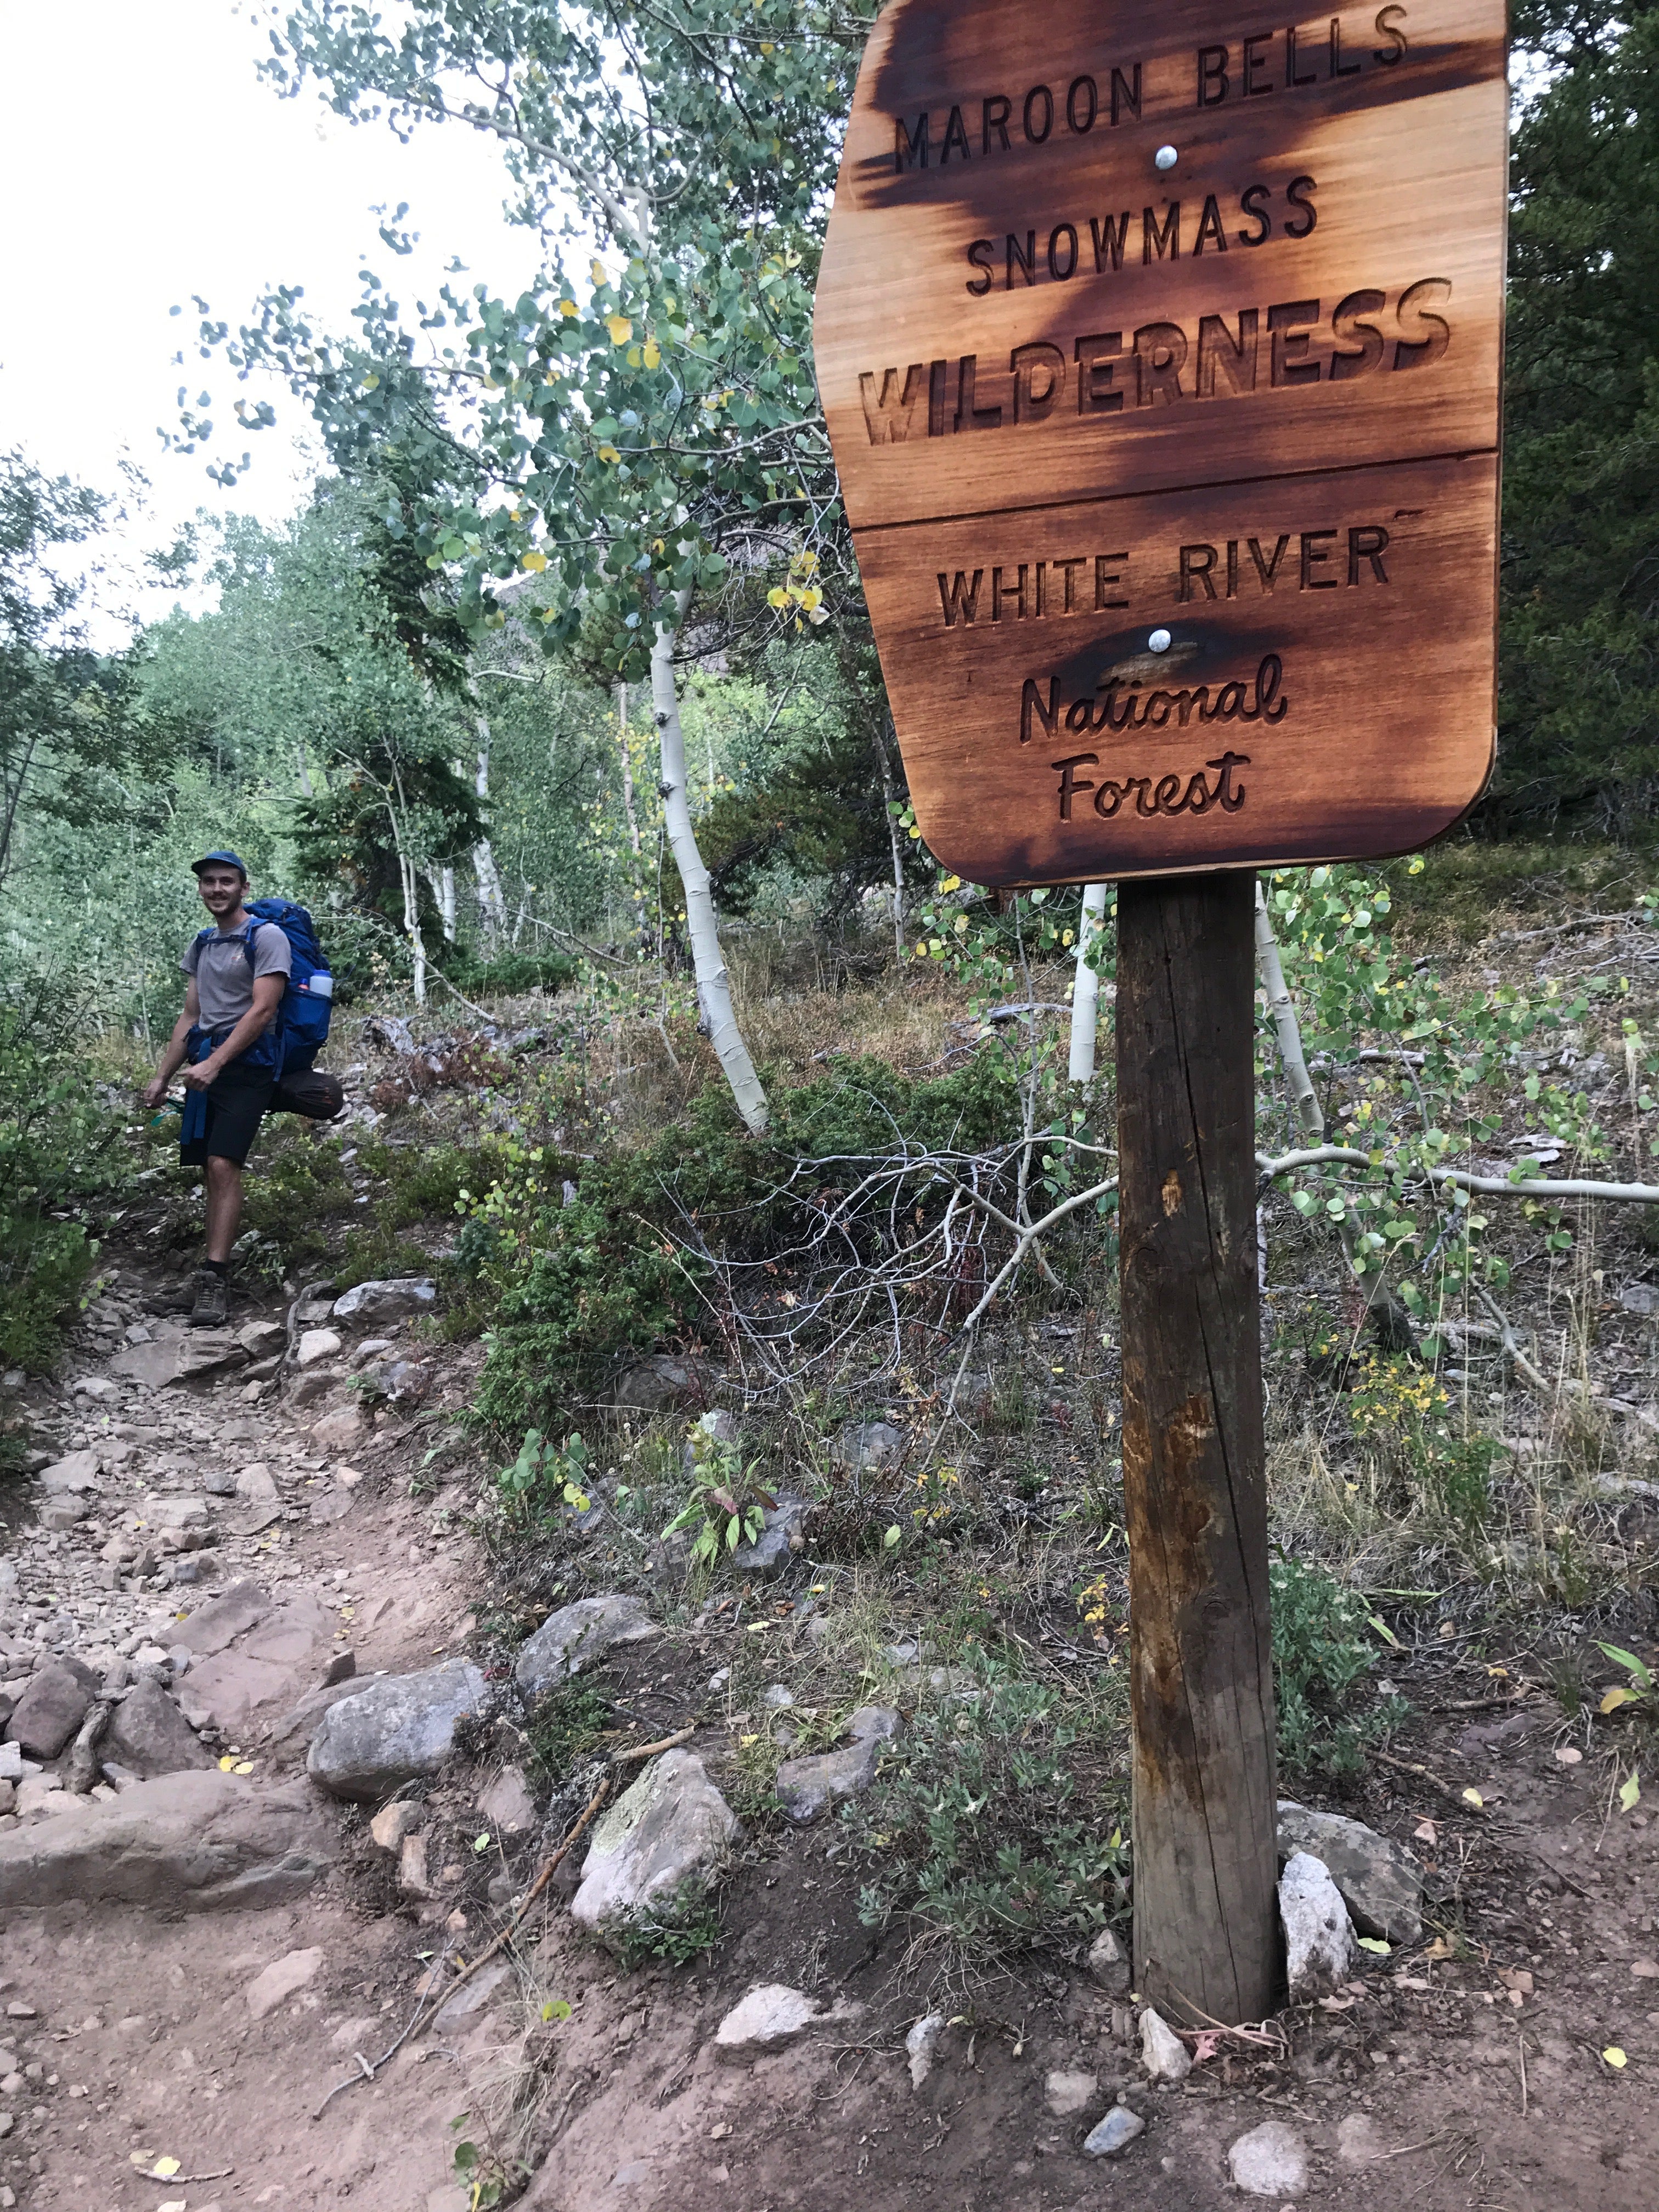 Camper submitted image from Maroon Bells-Snowmass Wilderness Dispersed Camping - 4